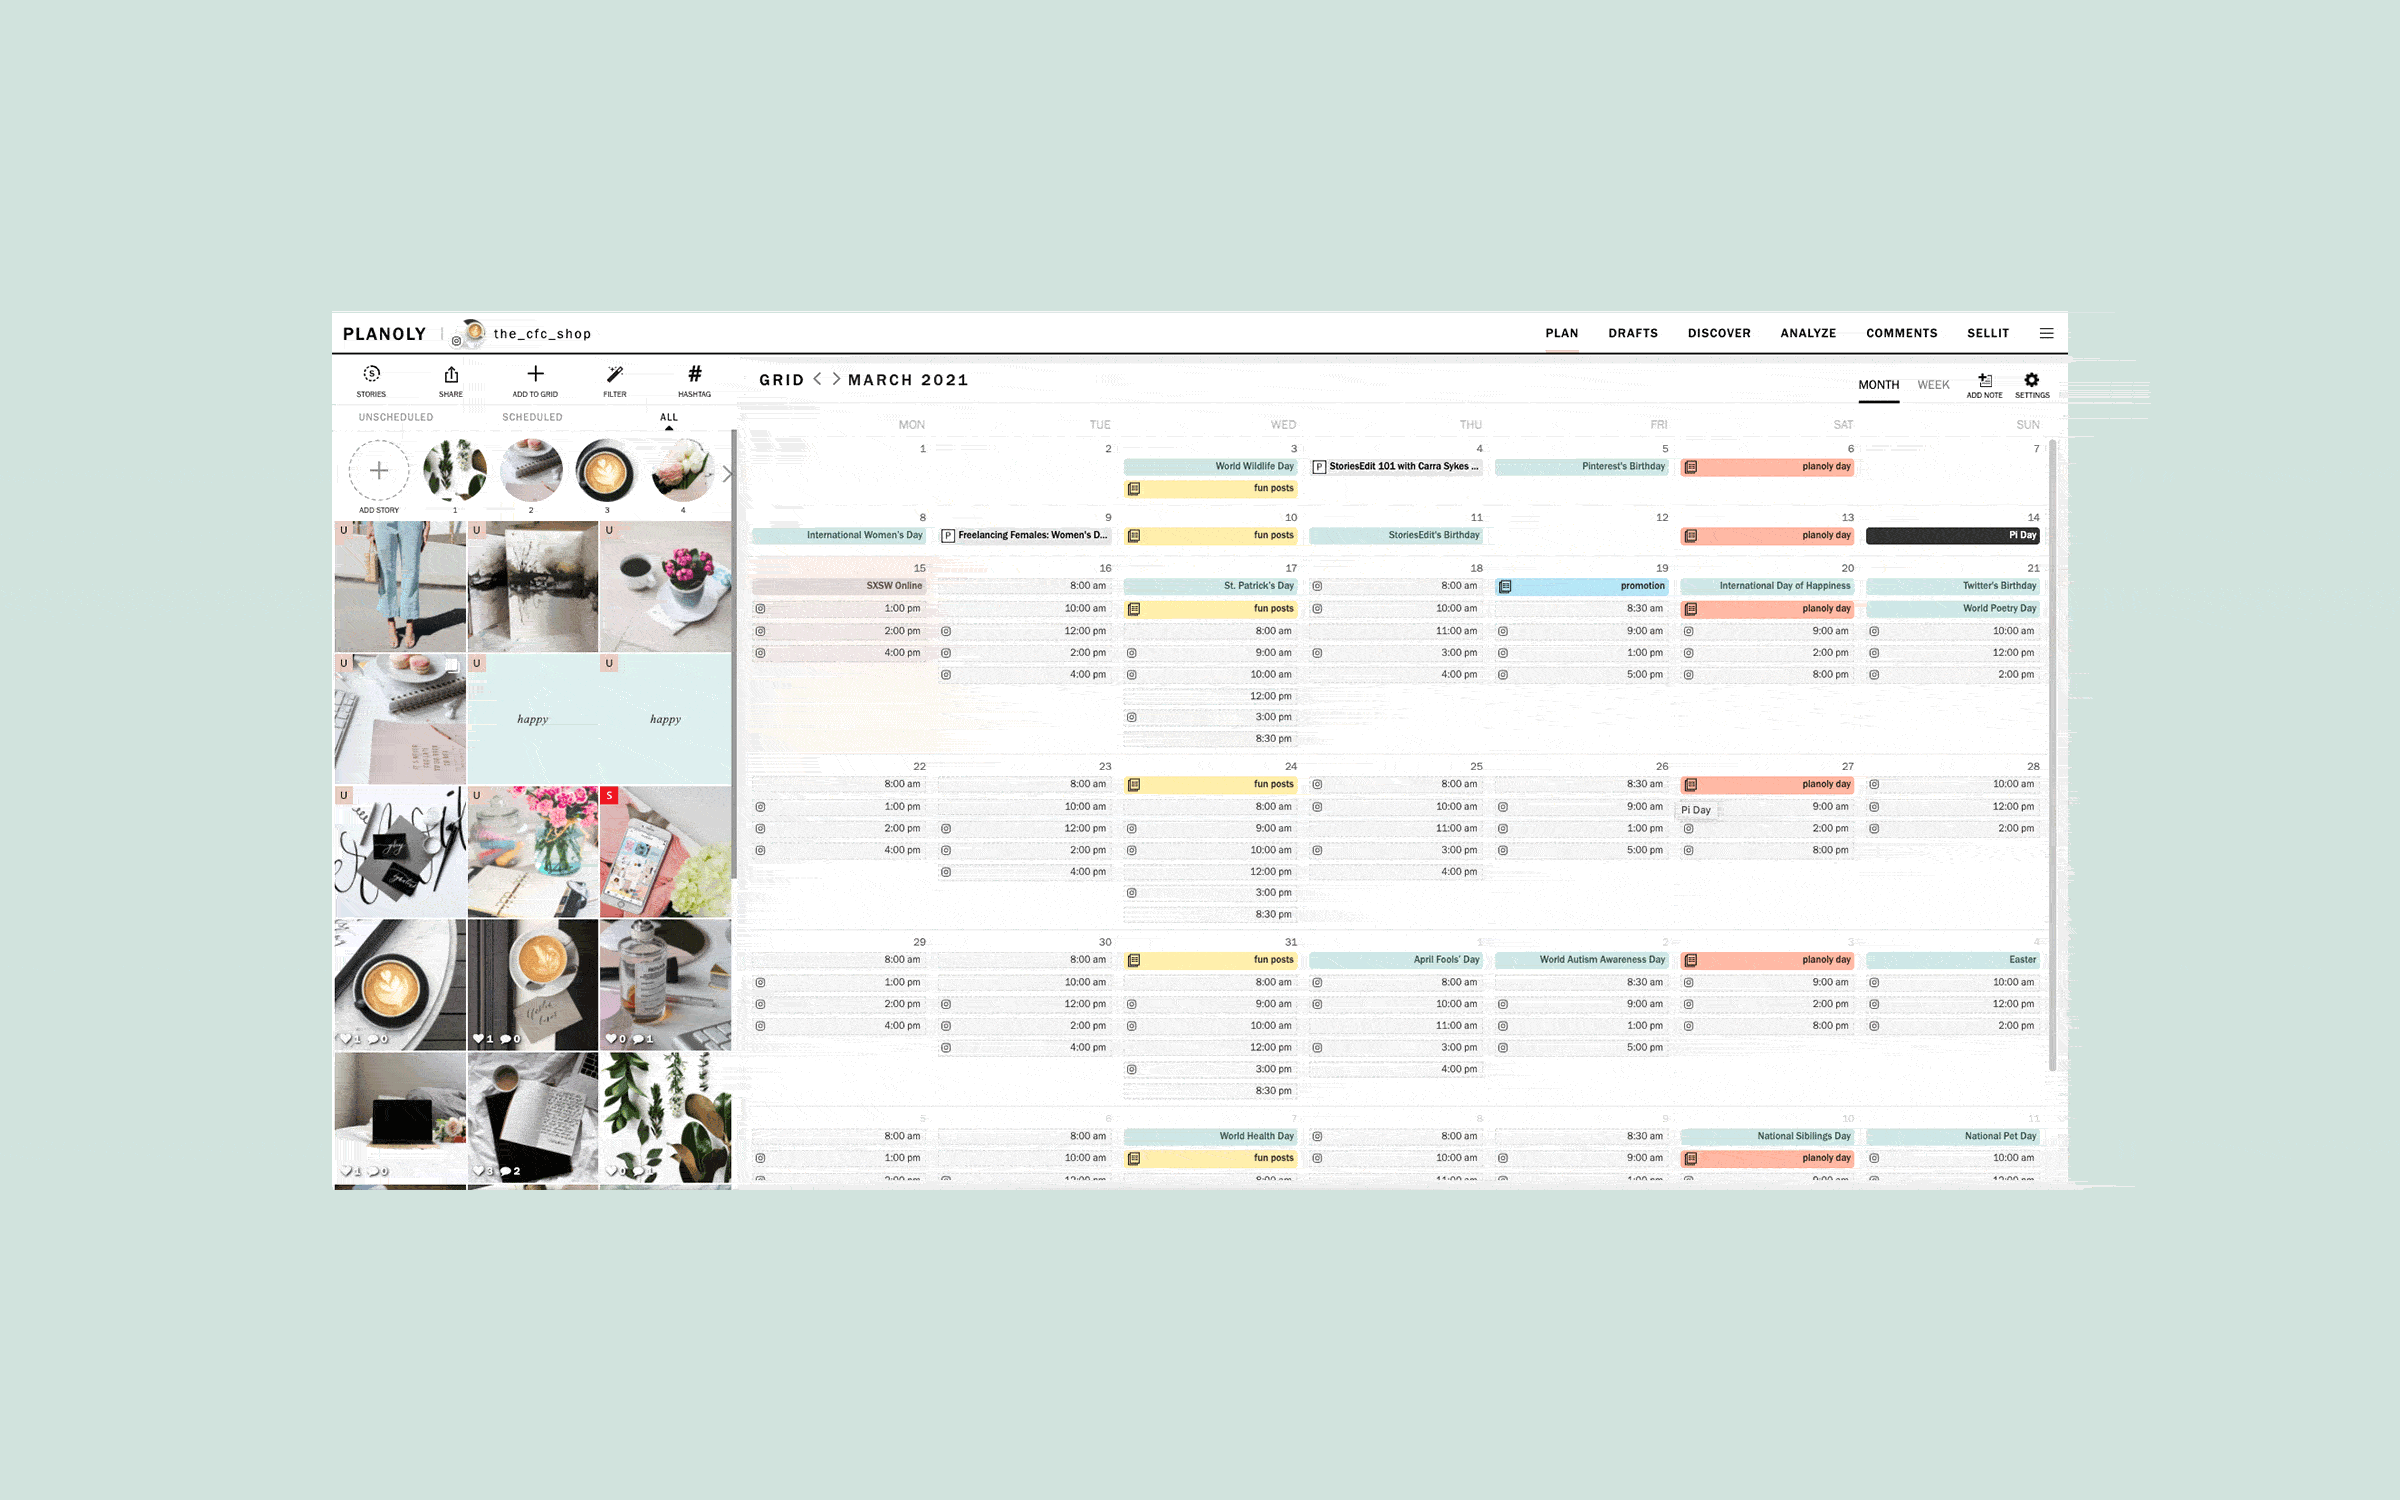 Overview of analyze in PLANOLY's web dashboard